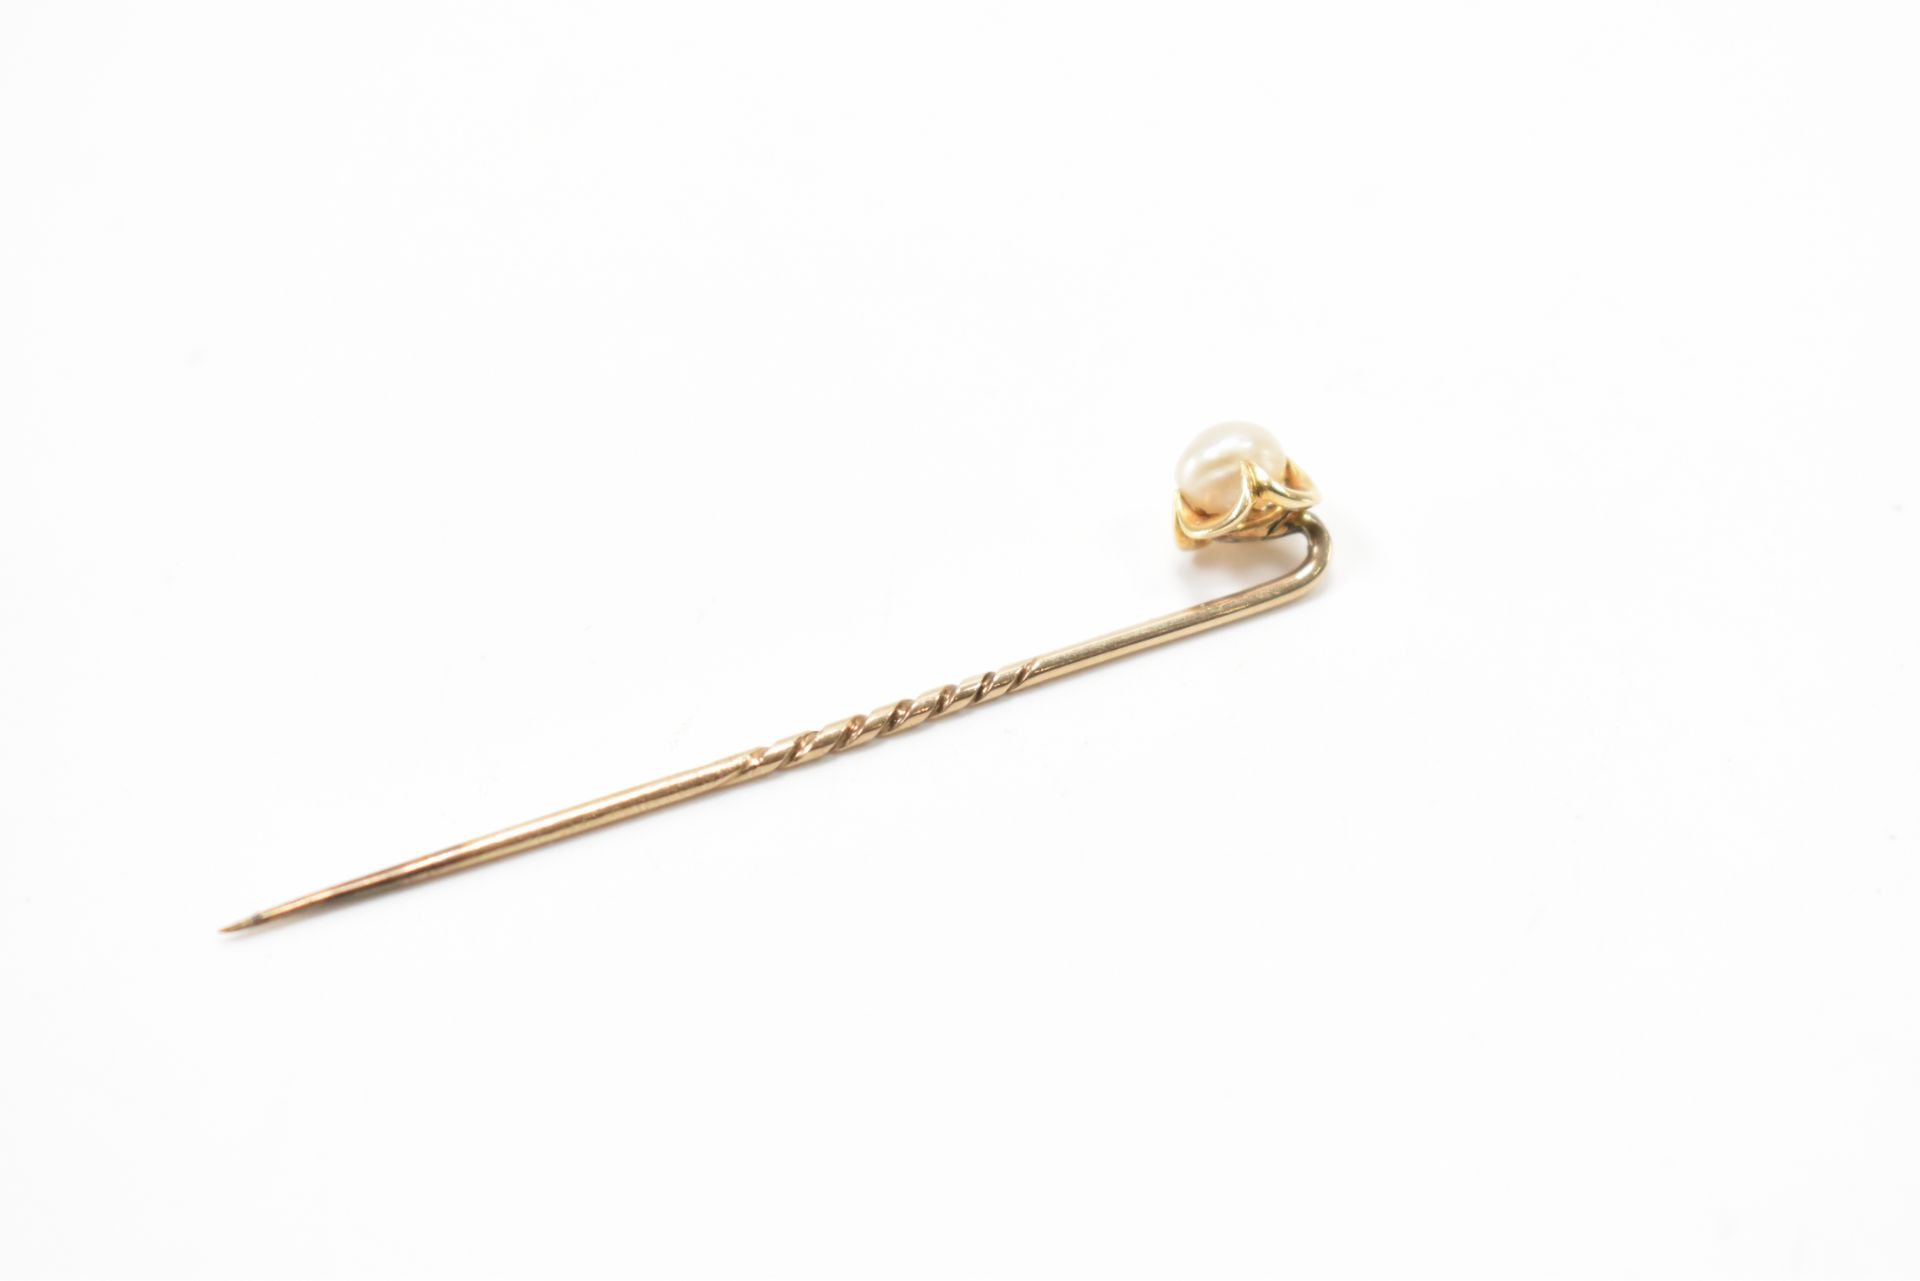 ANTIQUE GOLD & PEARL STICK PIN IN BOX - Image 7 of 8